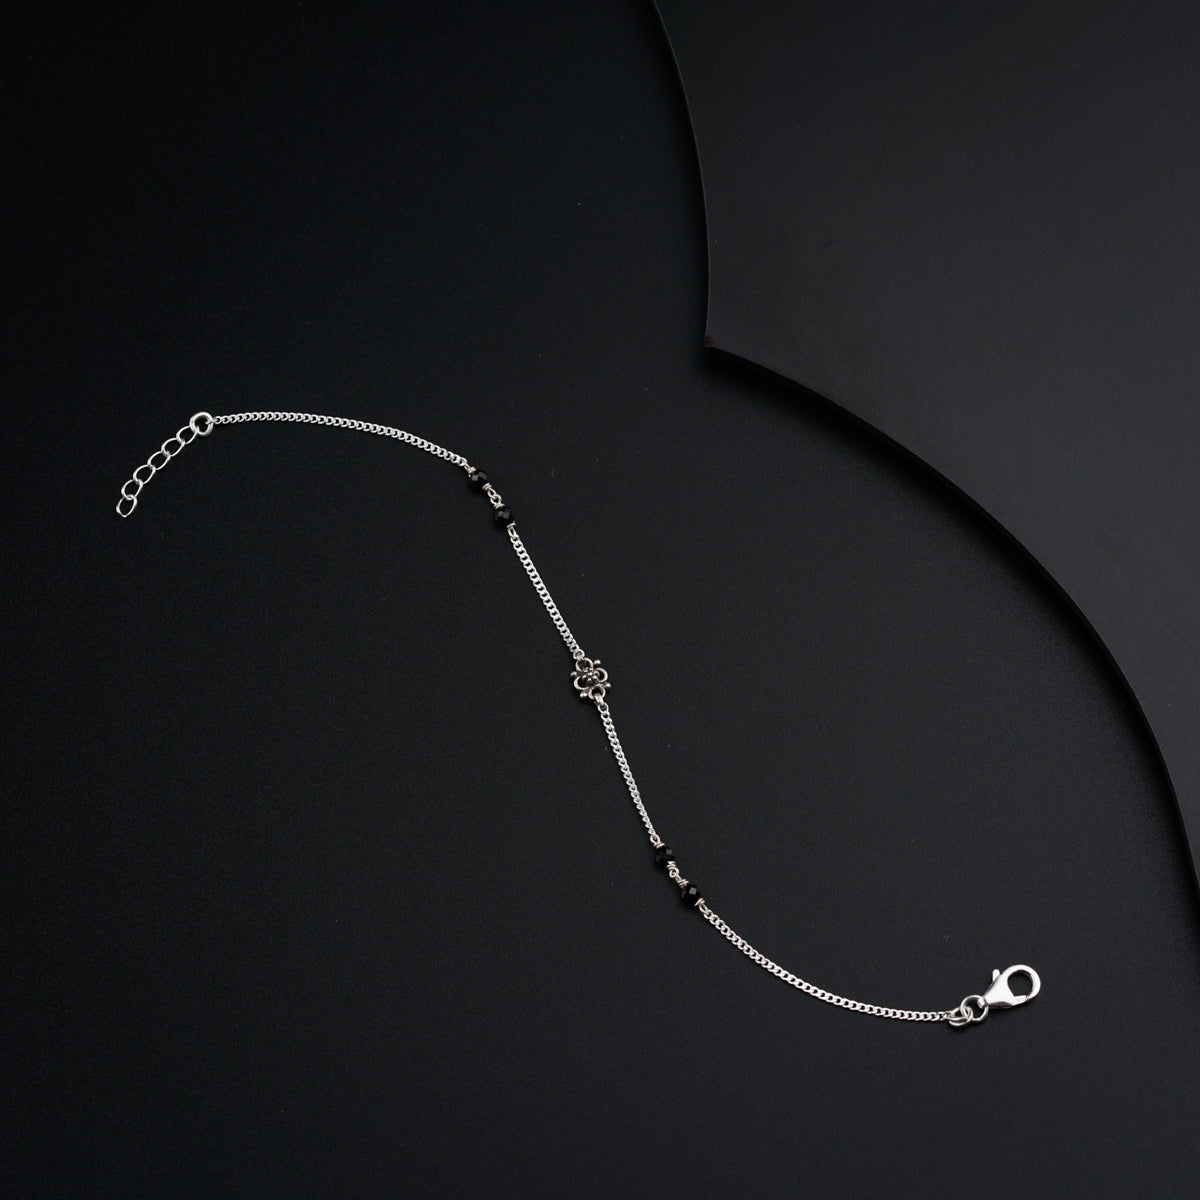 a silver chain with a clasp on a black background